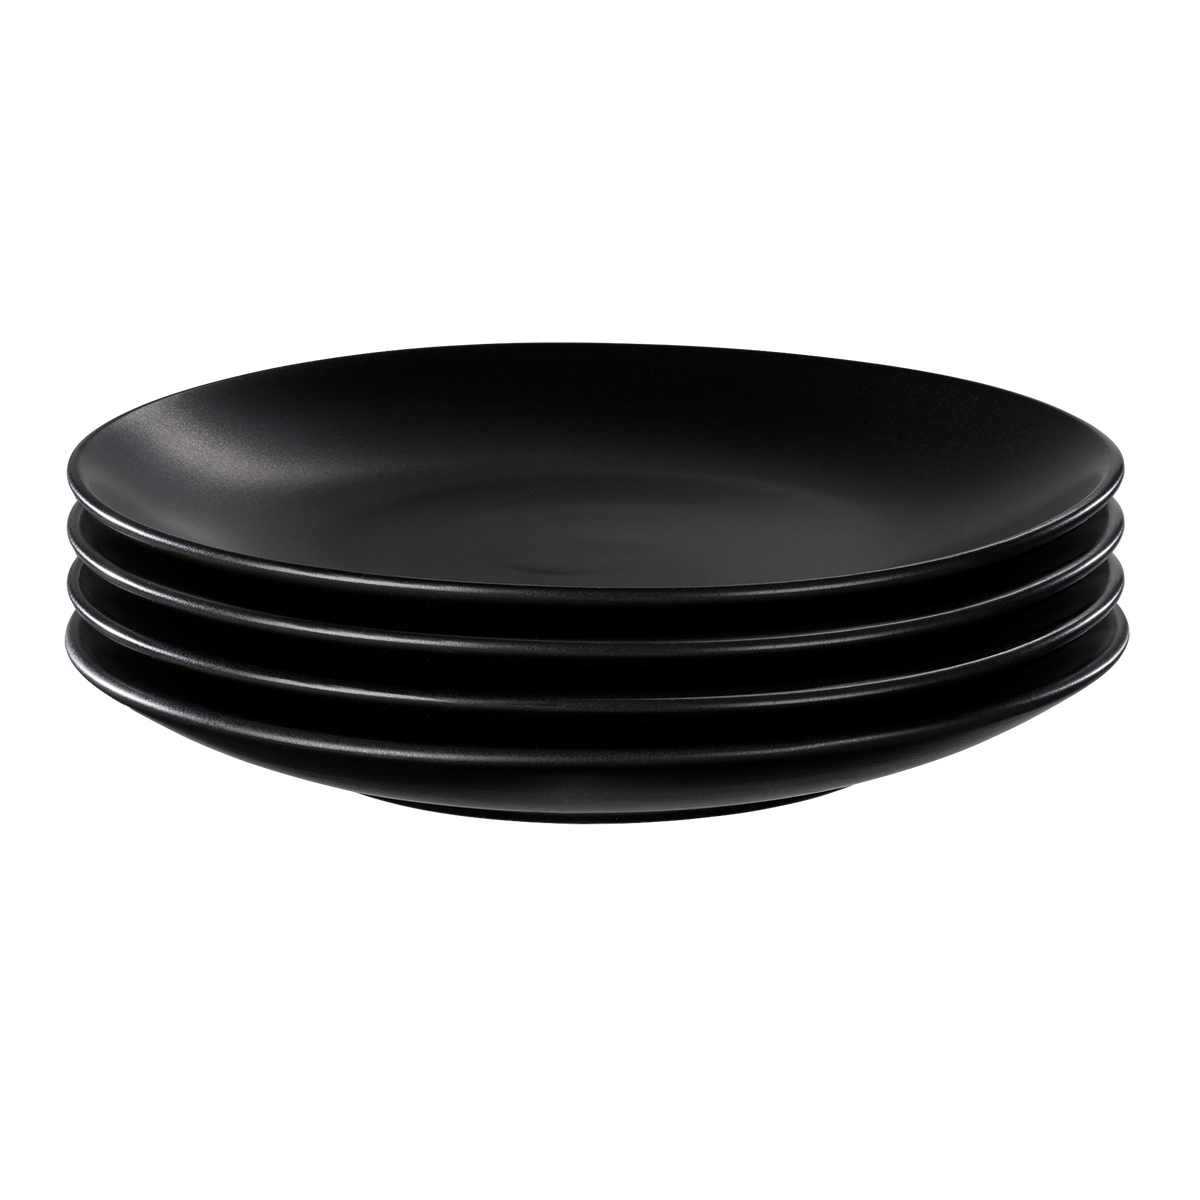 Product photo, a set of 4 stacked black stoneware salad plates.